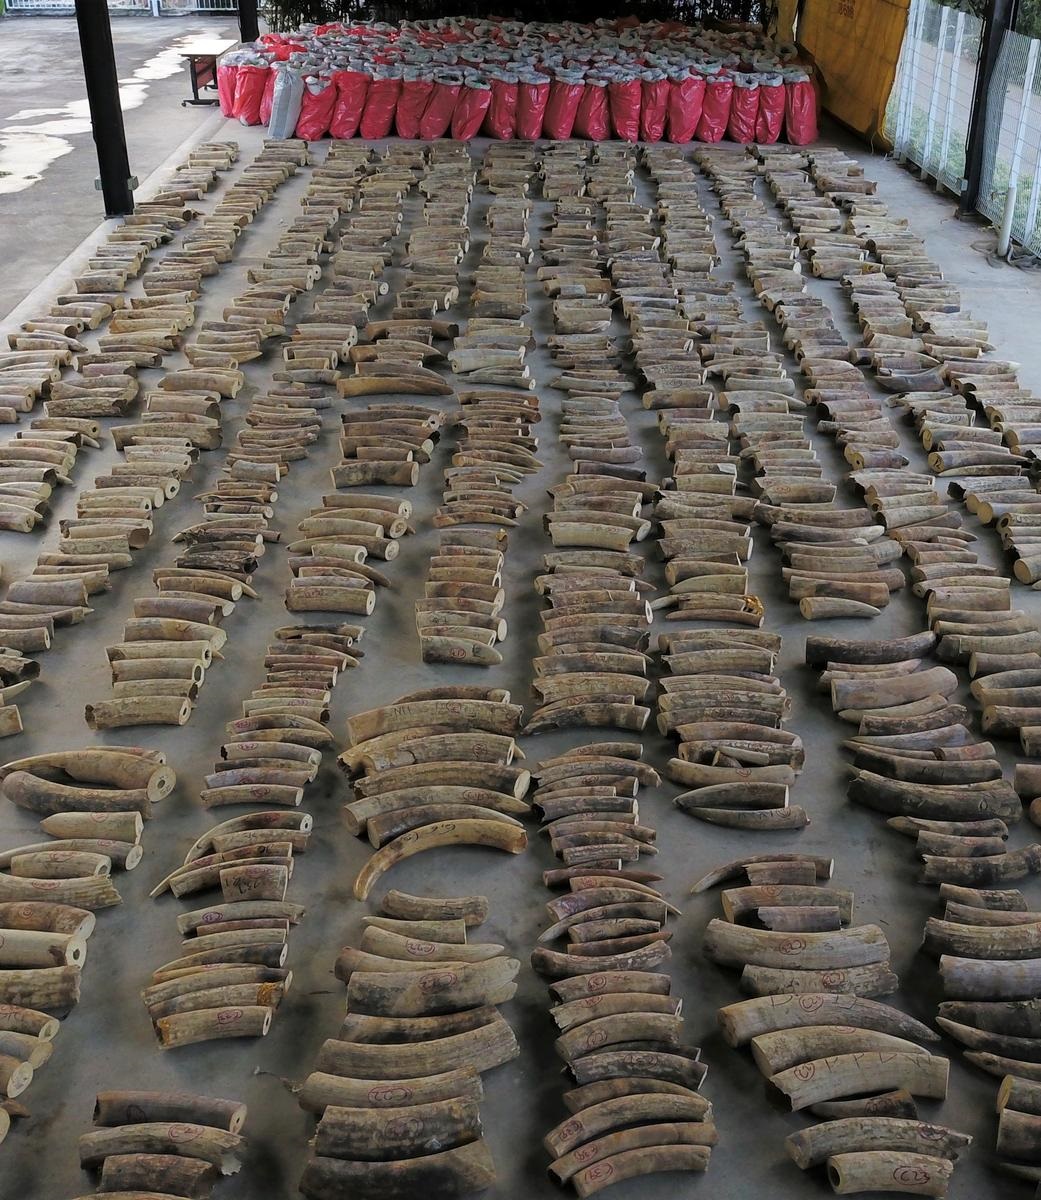 Singapore seizes ivory from nearly 300 elephants in record haul bound for Vietnam